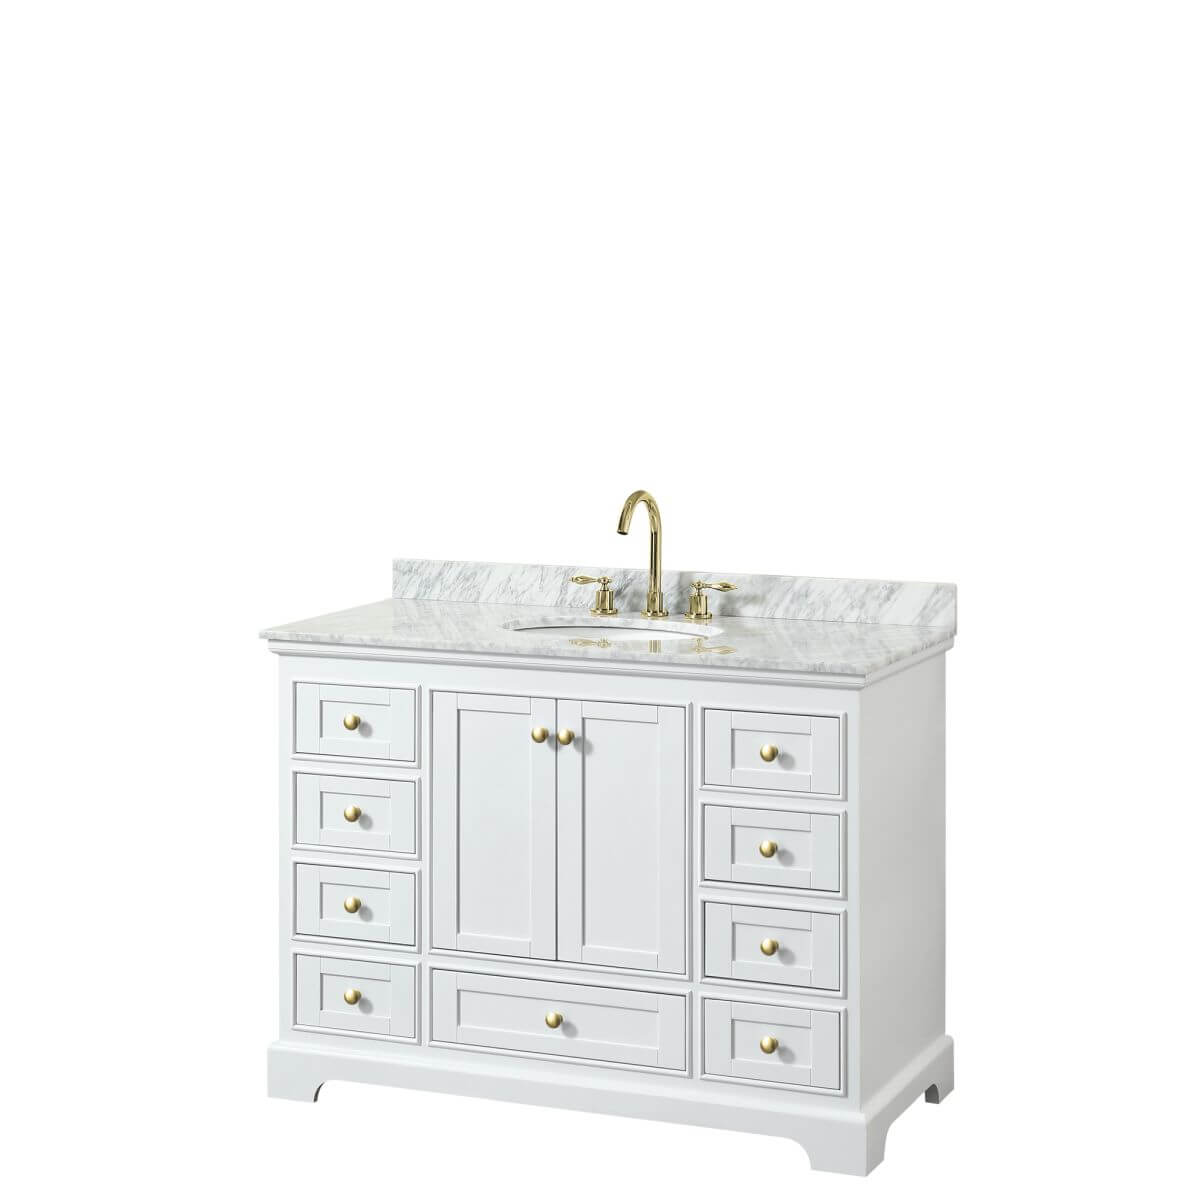 Wyndham Collection Deborah 48 inch Single Bathroom Vanity in White with White Carrara Marble Countertop, Undermount Oval Sink, Brushed Gold Trim and No Mirror - WCS202048SWGCMUNOMXX